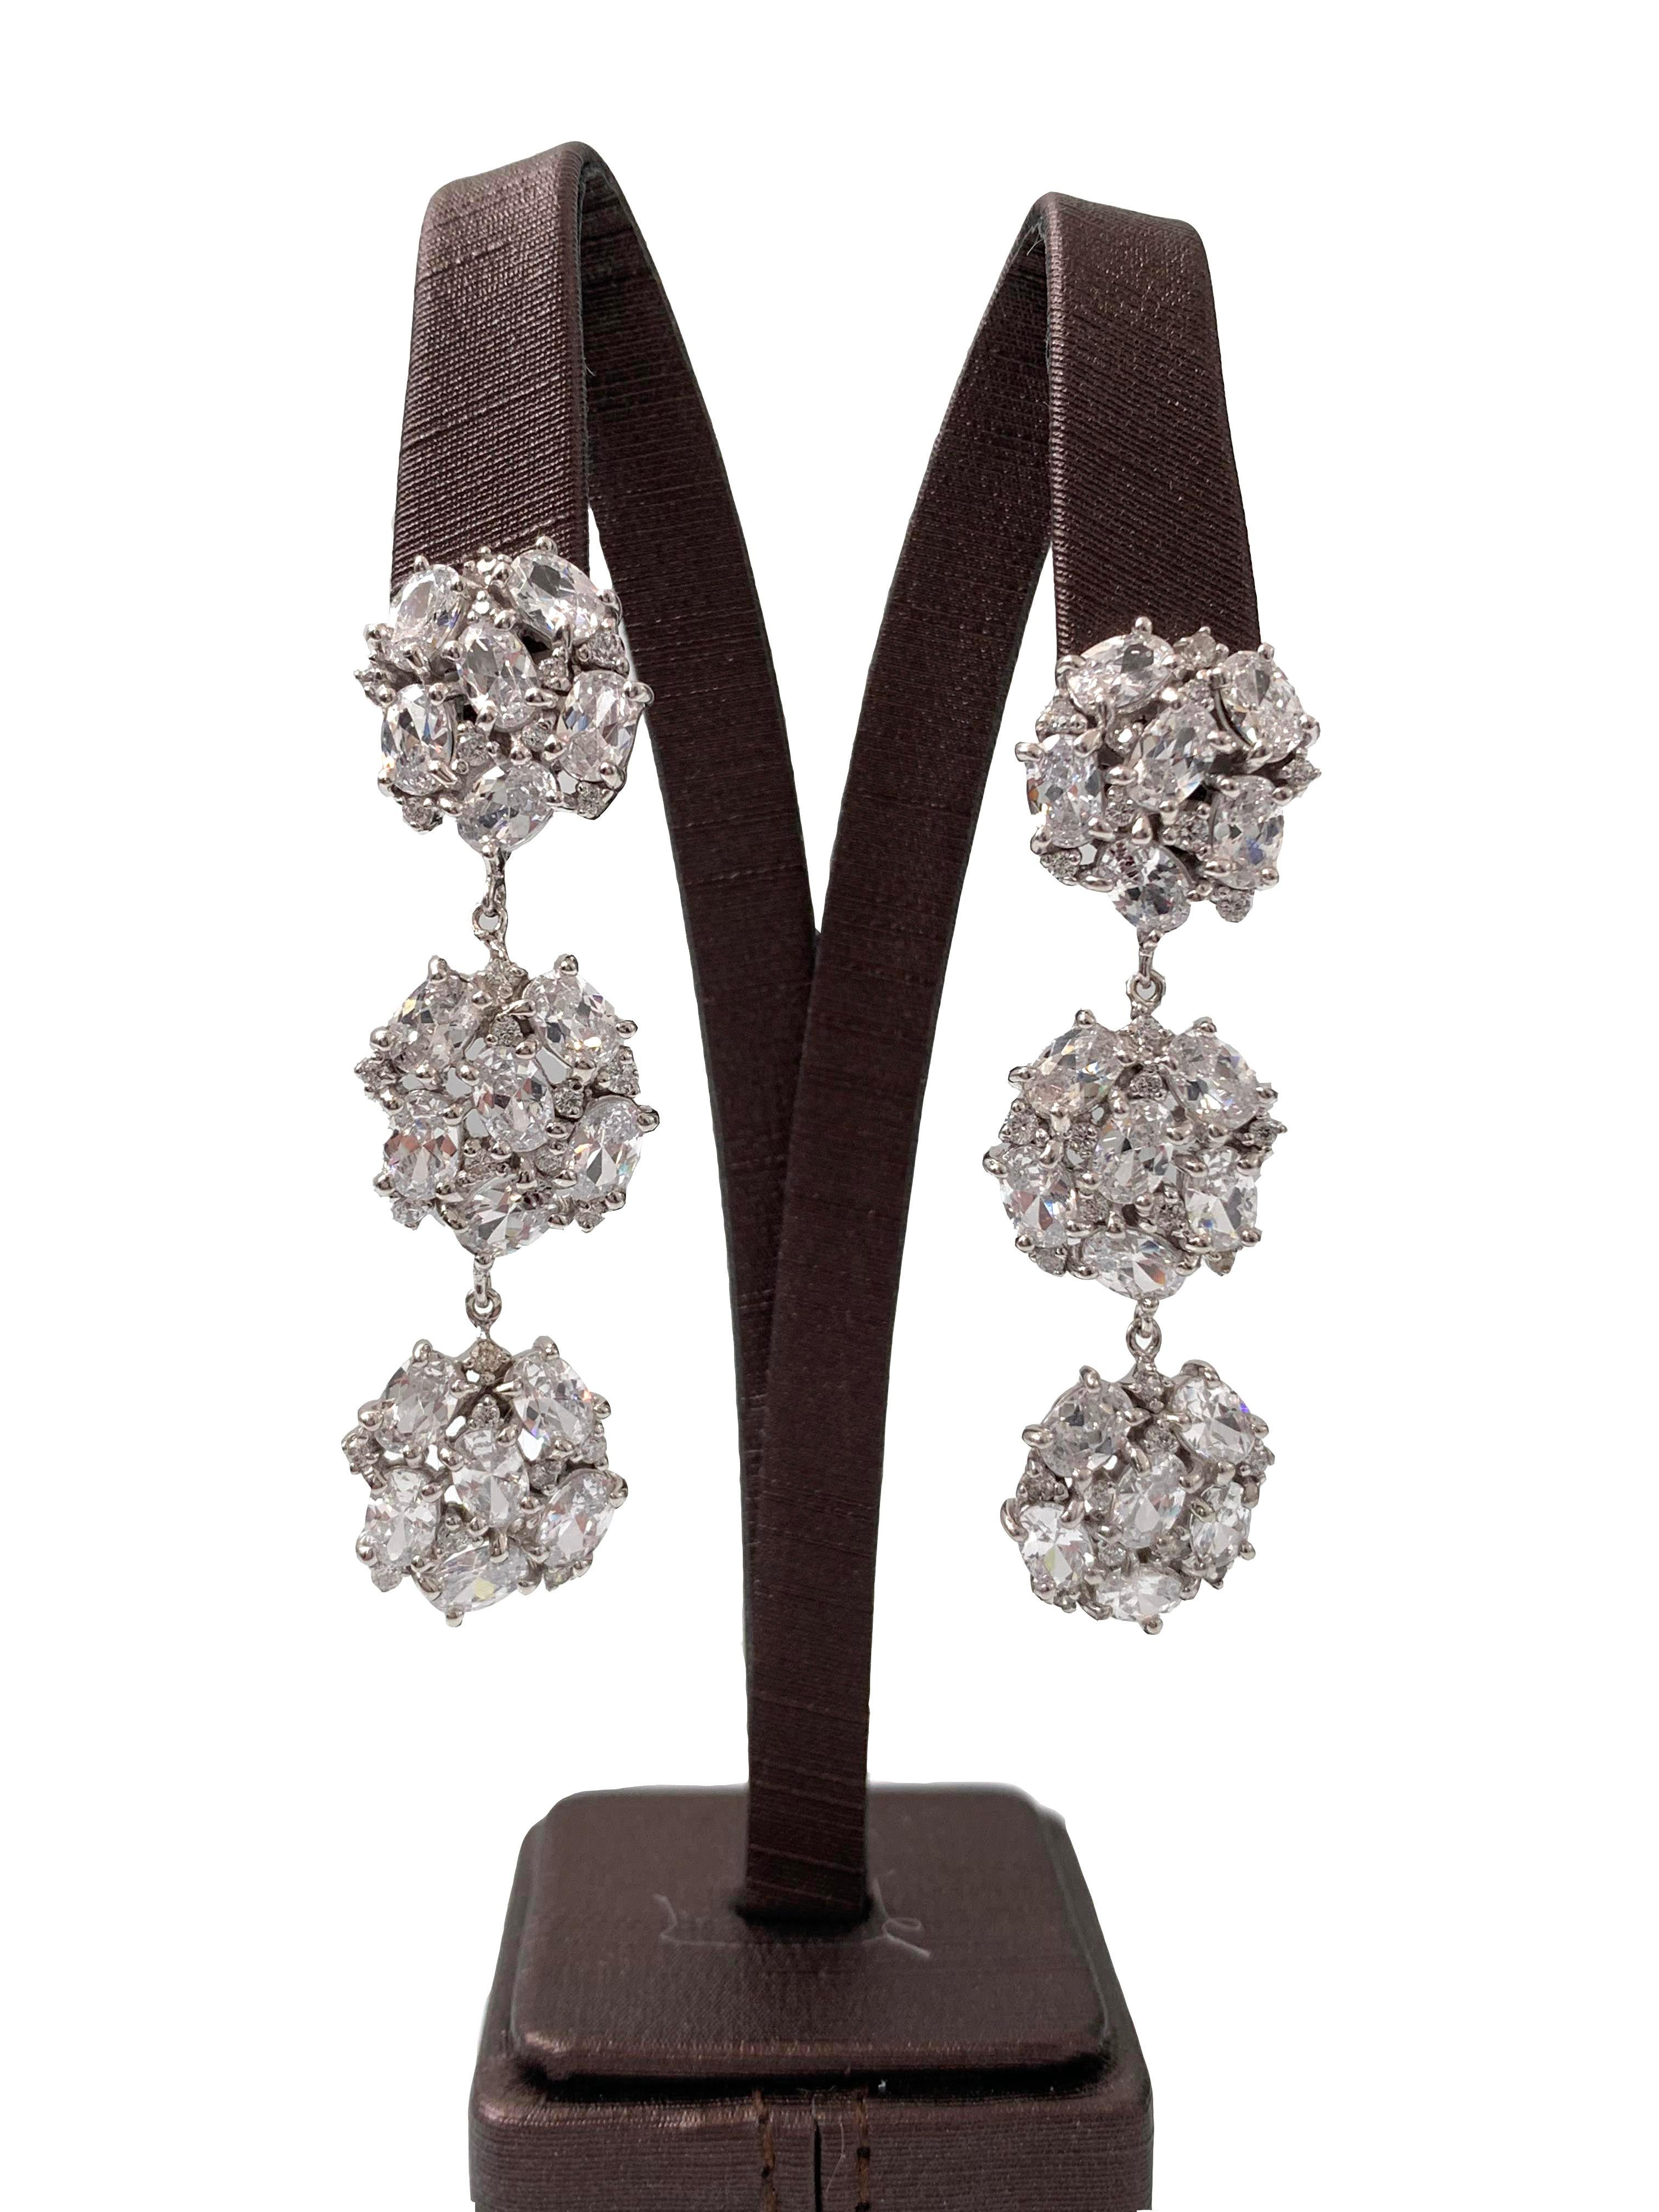 Stunning 3-tier encrusted faux diamond dangle earrings. These earrings feature 90pcs of round and oval cubic zirconia (AAA quality), handset in platinum rhodium plated sterling silver. The earrings measure approximately 2.5